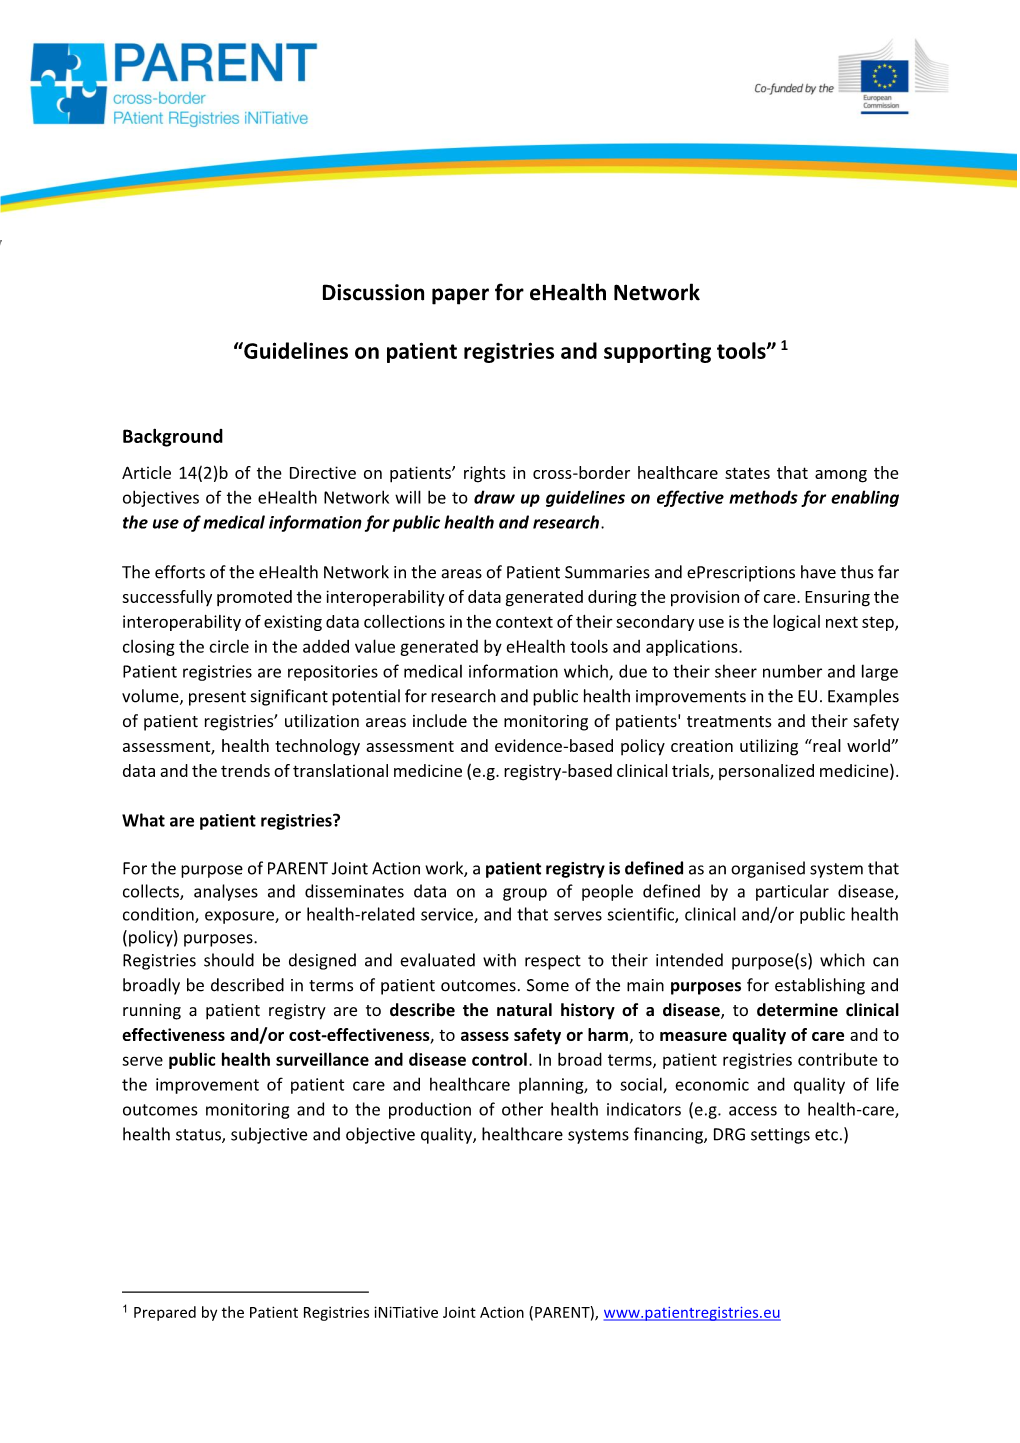 Discussion Paper for Ehealth Network “Guidelines on Patient Registries